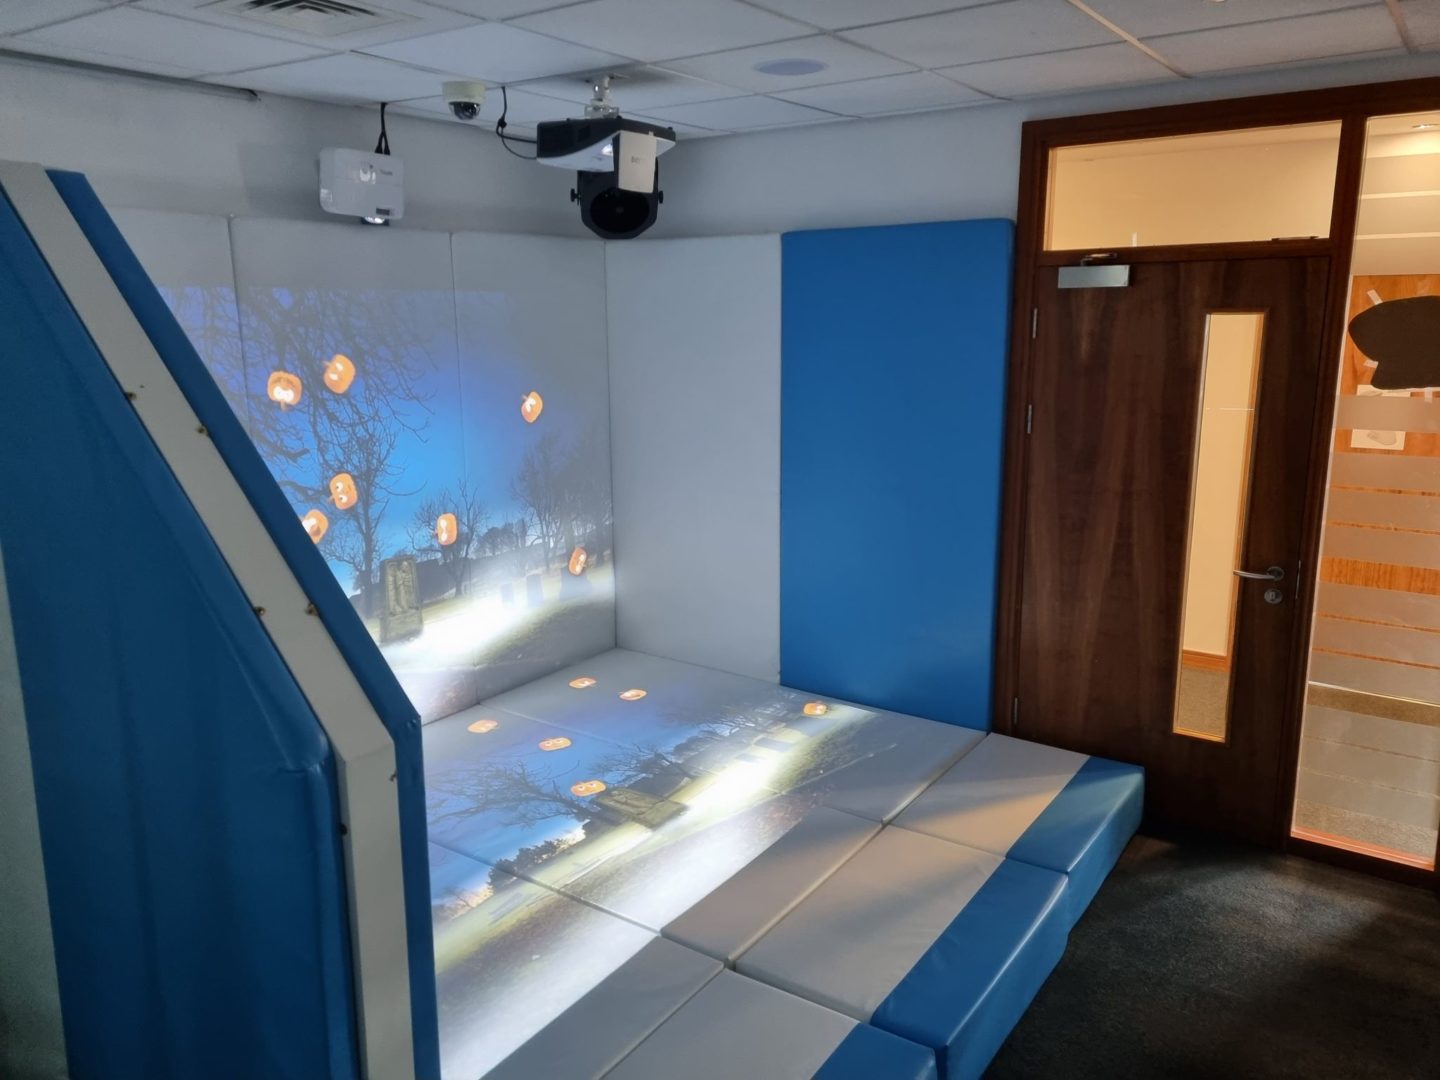 fully interactive immersive room including 2 interactive walls , 2 interactive floors and a range of DMX sensory effect hardware. displaying the pumpkin splat activity to provide physical stimulation in a SEND environment